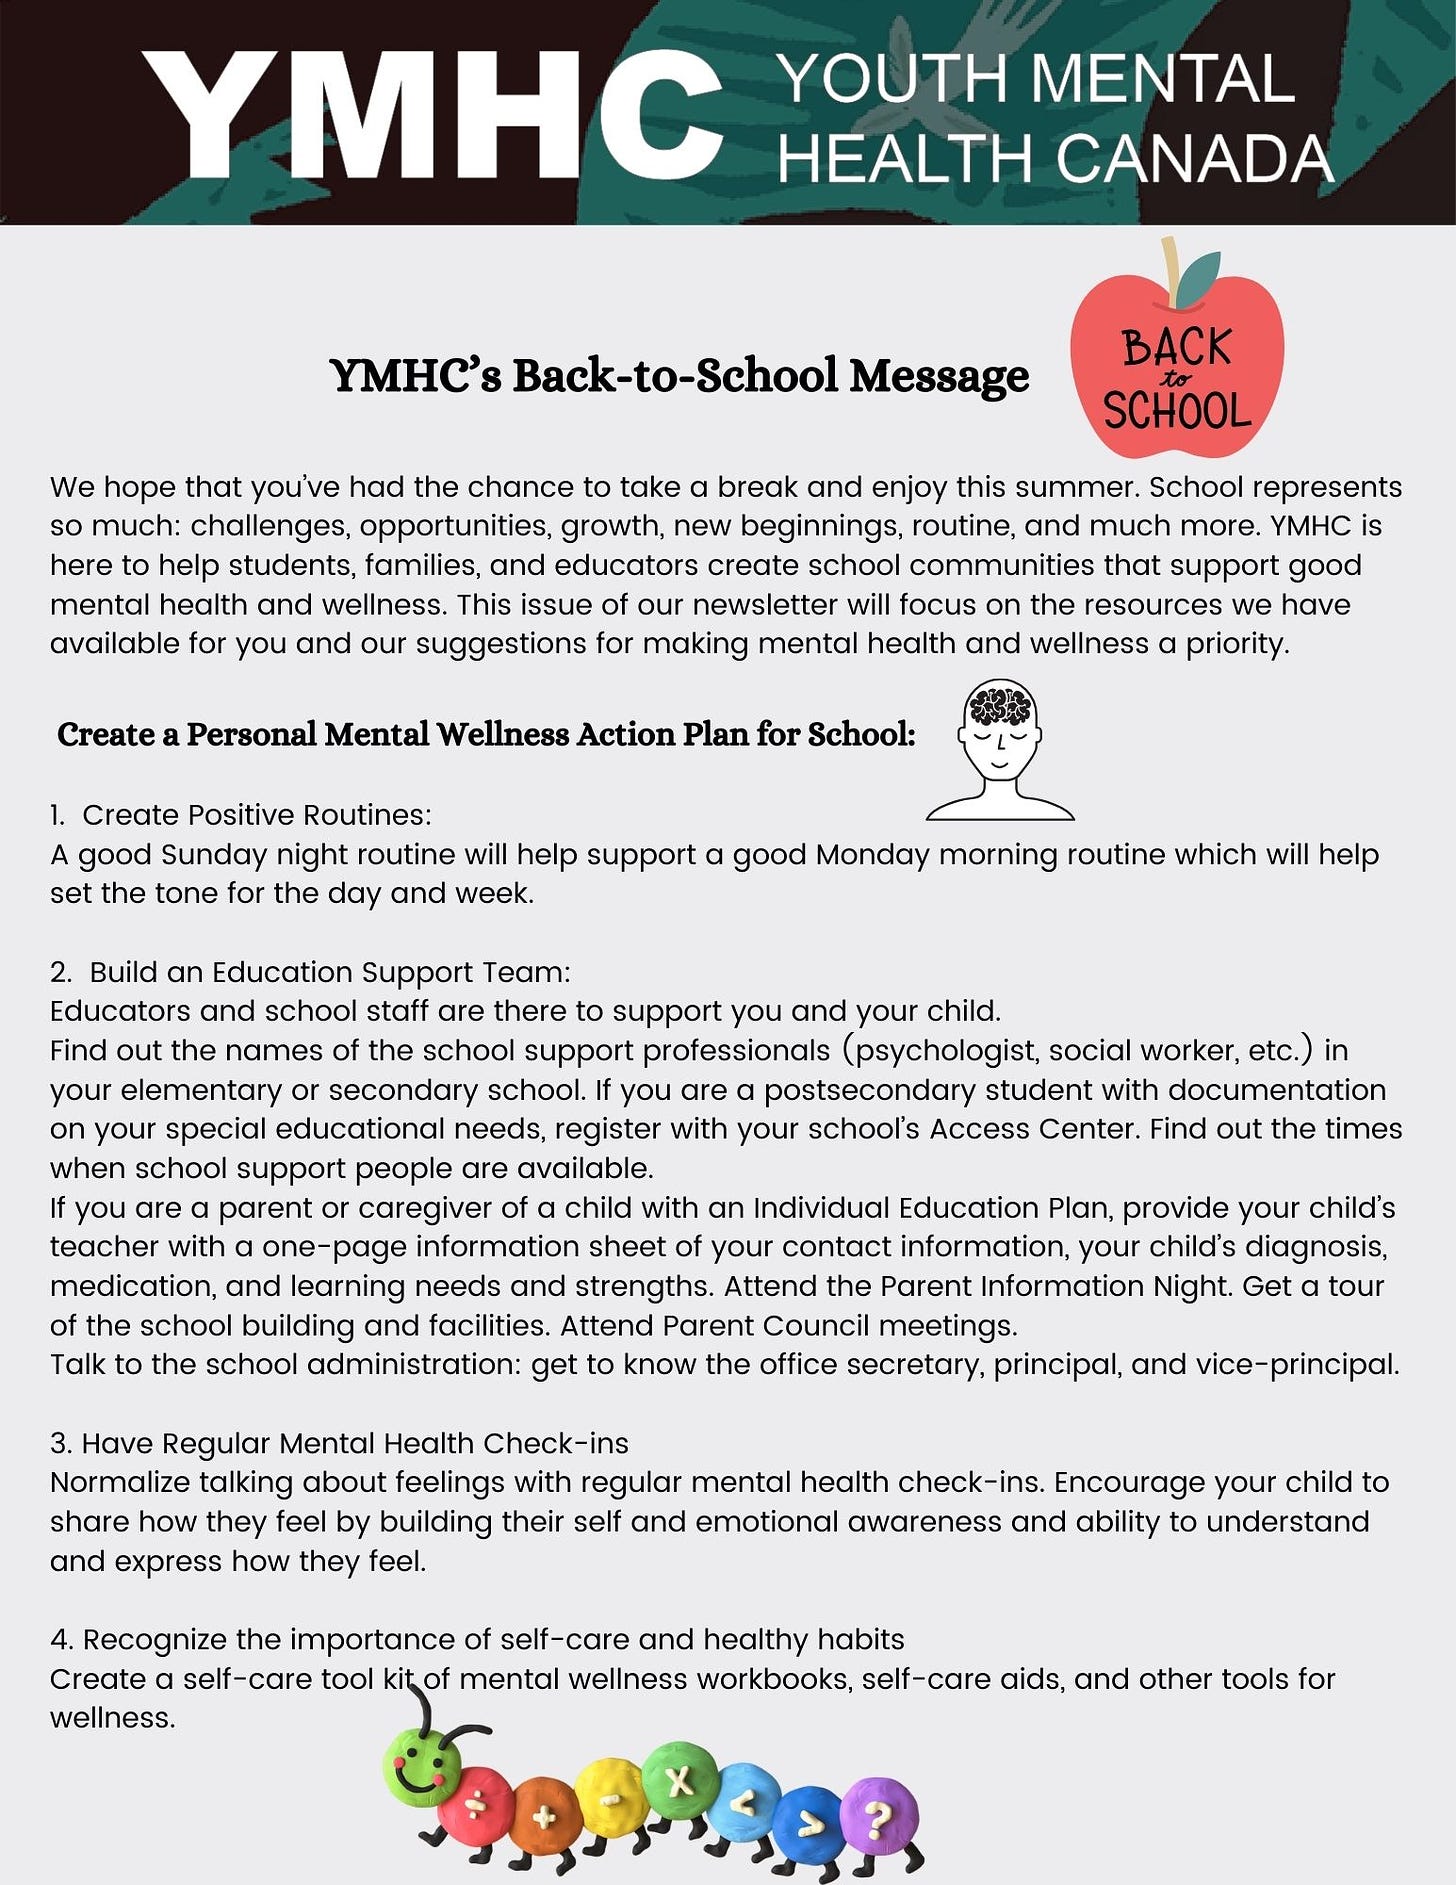 YMHC’s Back-to-School Message  We hope that you’ve had the chance to take a break and enjoy this summer. School represents so much: challenges, opportunities, growth, new beginnings, routine, and much more. YMHC is here to help students, families, and educators create school communities that support good mental health and wellness. This issue of our newsletter will focus on the resources we have available for you and our suggestions for making mental health and wellness a priority.   Create a Personal Mental Wellness Action Plan for School:  1.  Create Positive Routines:  A good Sunday night routine will help support a good Monday morning routine which will help set the tone for the day and week.    2.  Build an Education Support Team: Educators and school staff are there to support you and your child.  Find out the names of the school support professionals (psychologist, social worker, etc.) in your elementary or secondary school. If you are a postsecondary student with documentation on your special educational needs, register with your school’s Access Center. Find out the times when school support people are available.  If you are a parent or caregiver of a child with an Individual Education Plan, provide your child’s teacher with a one-page information sheet of your contact information, your child’s diagnosis, medication, and learning needs and strengths. Attend the Parent Information Night. Get a tour of the school building and facilities. Attend Parent Council meetings.  Talk to the school administration: get to know the office secretary, principal, and vice-principal.    3. Have Regular Mental Health Check-ins Normalize talking about feelings with regular mental health check-ins. Encourage your child to share how they feel by building their self and emotional awareness and ability to understand and express how they feel.    4. Recognize the importance of self-care and healthy habits Create a self-care tool kit of mental wellness workbooks, self-care aids, and other tools for wellness.